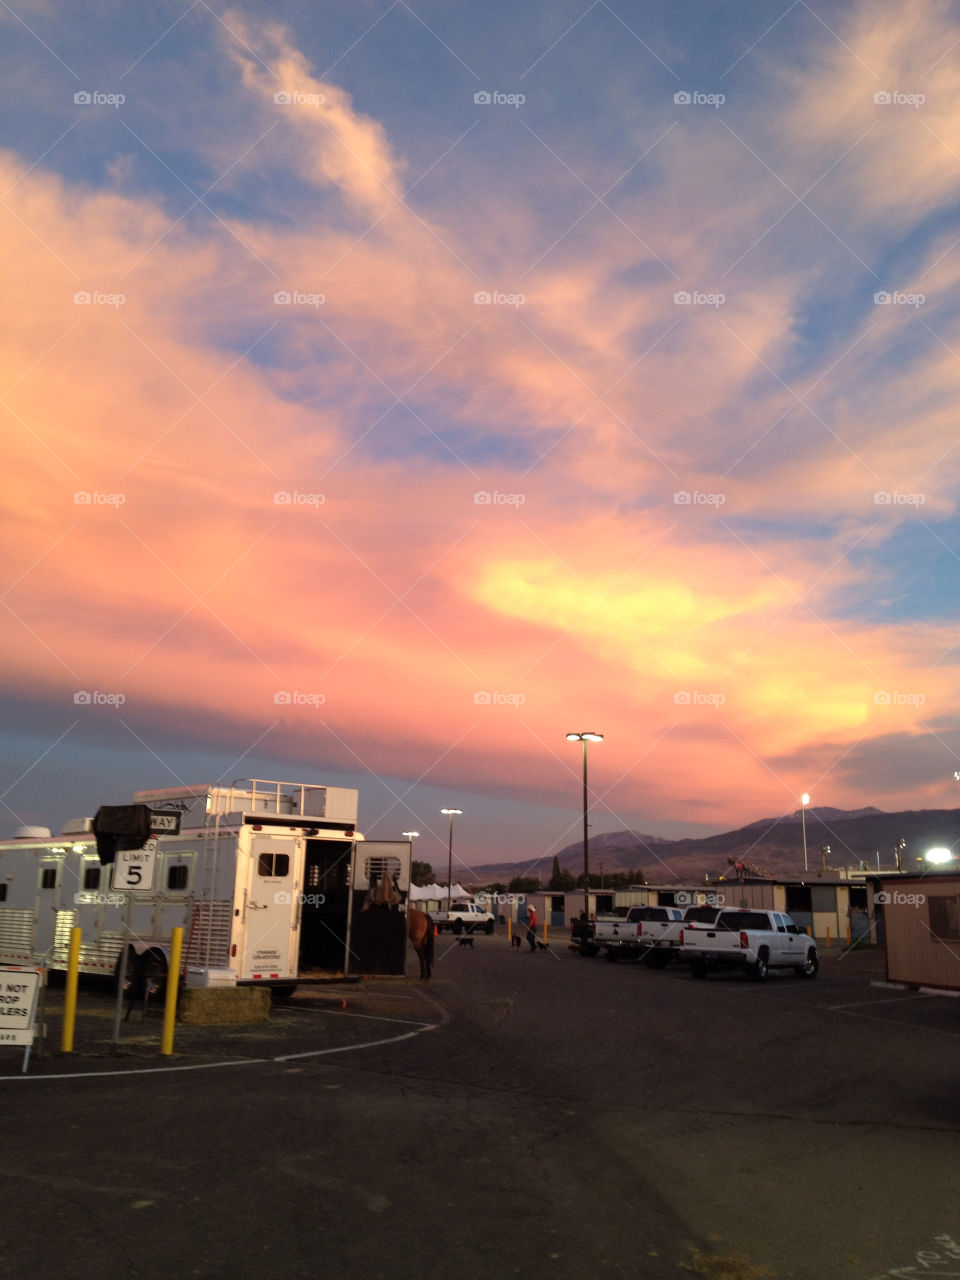 reno horse trailers at reno rodeo rodeo sky by Trevor